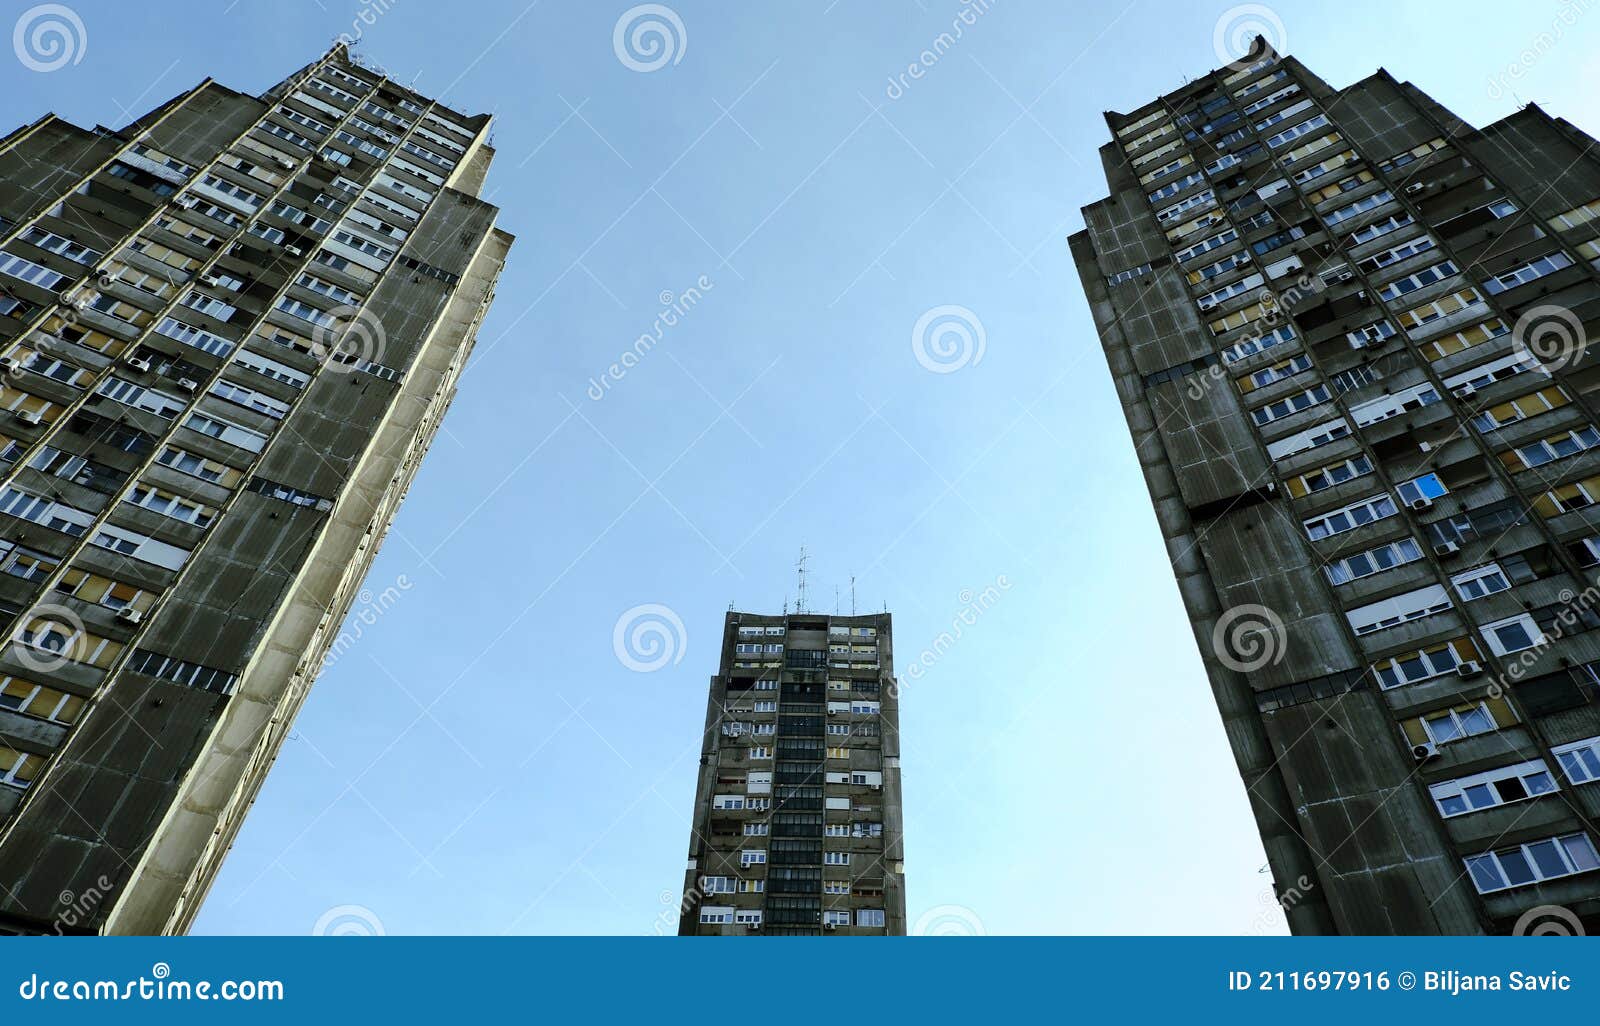 low angle view of tall three brutalist buildings in belgrade, serbia